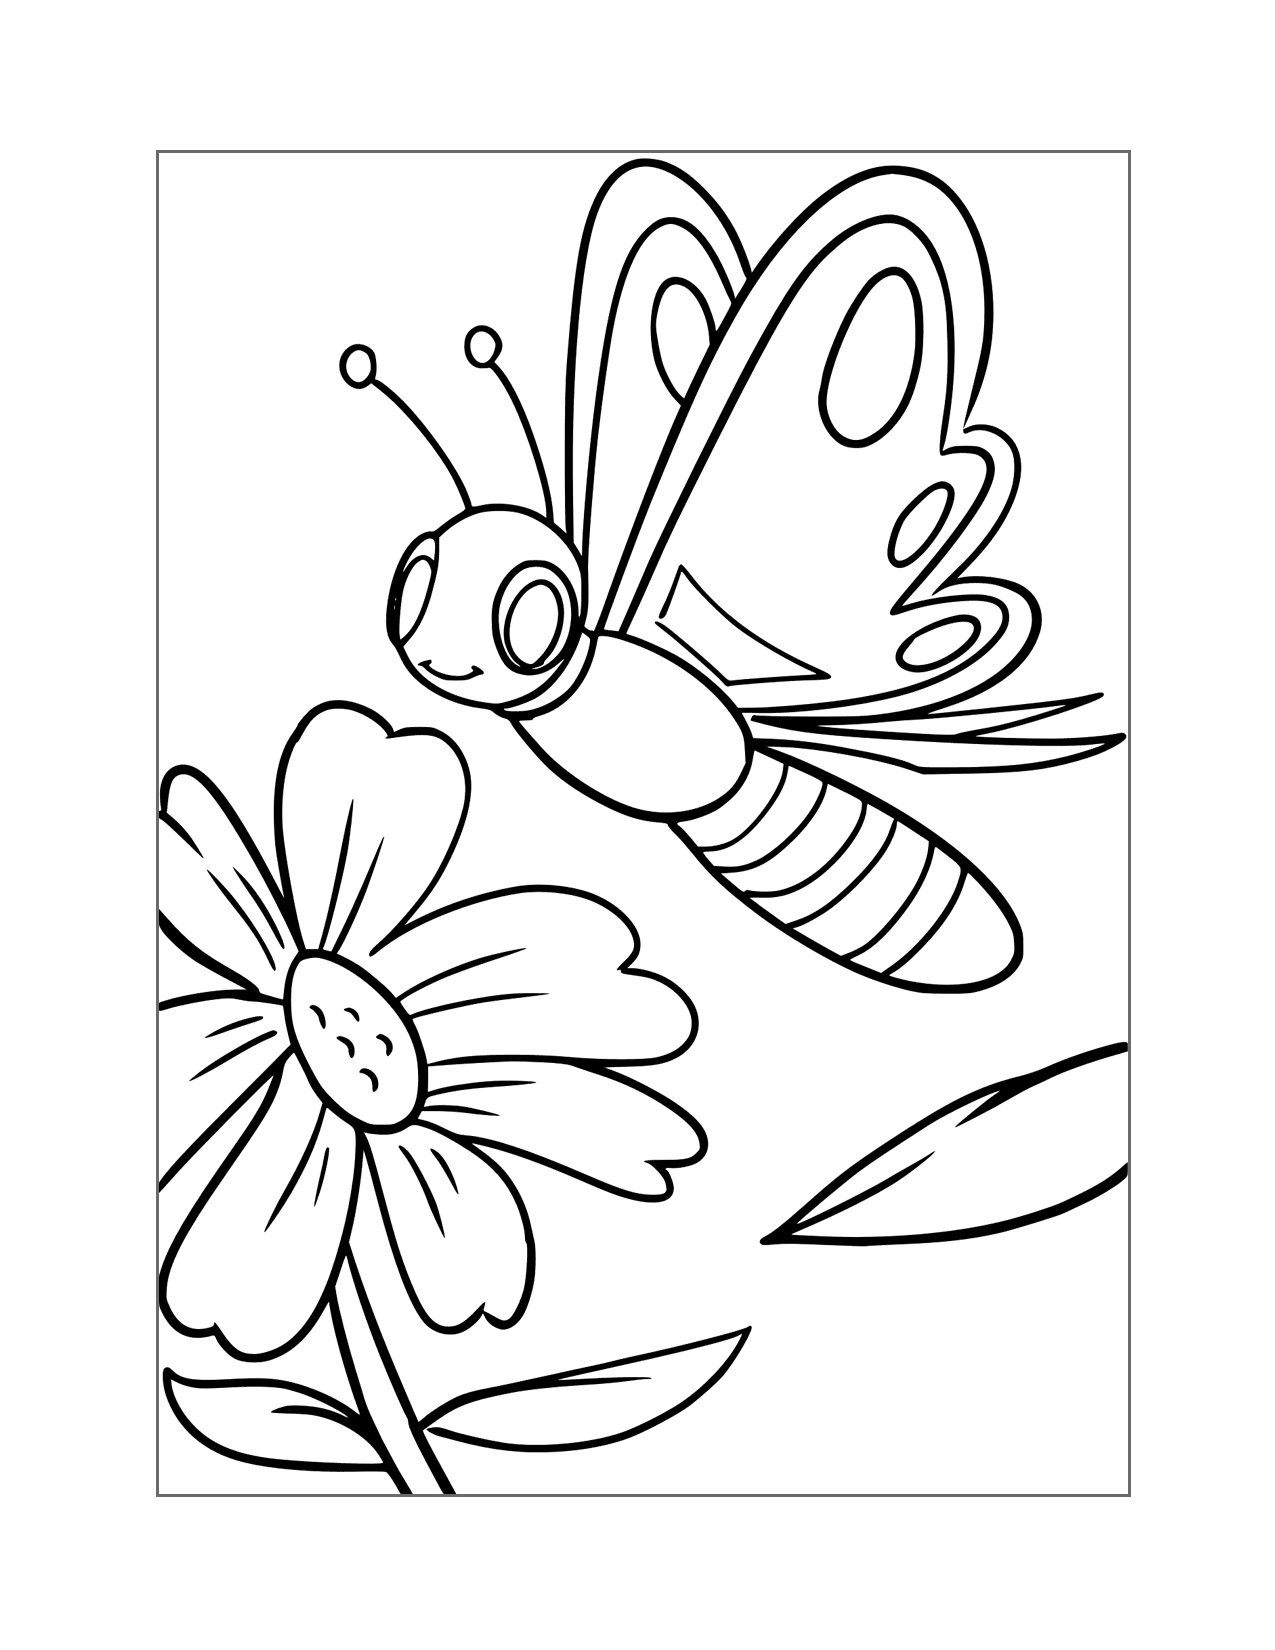 Cute Butterfly Cartoon Coloring Page